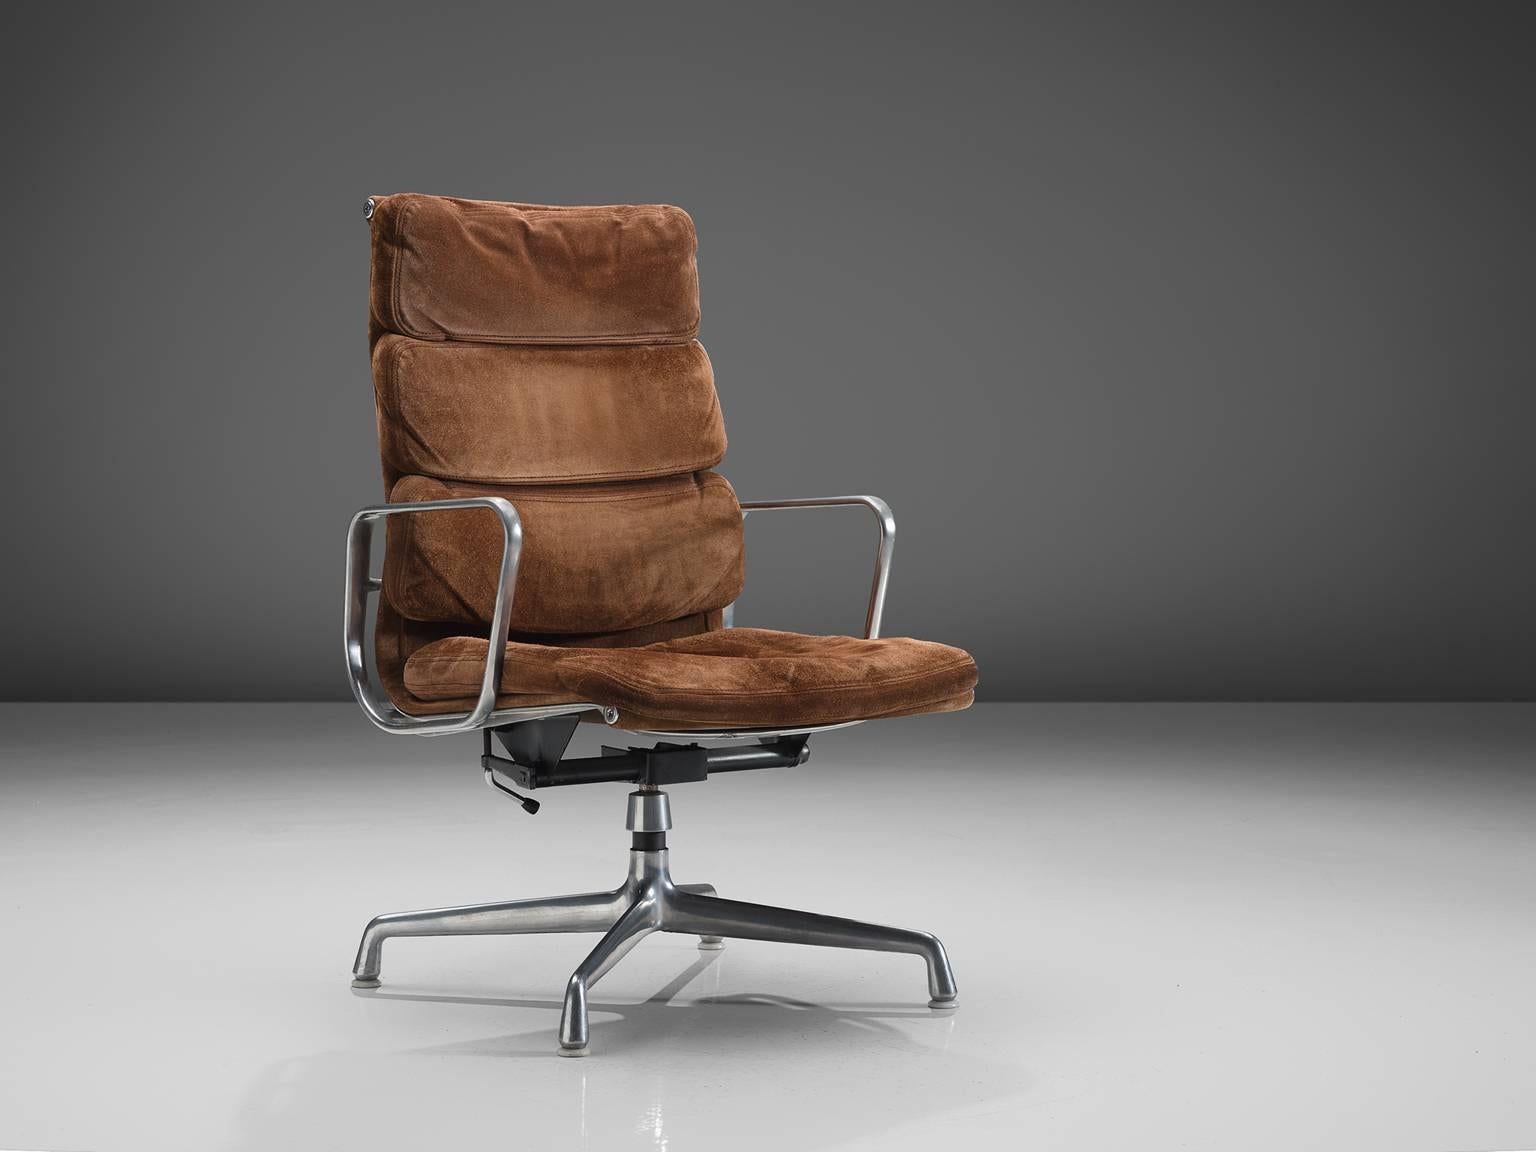 Charles and Ray Eames, lounge chair model EA219, fabric, aluminum, United States, 1969.

This chair is part of the 'Soft Pad Group' as designed by Charles and Ray Eames. This particular model EA219 has a high back and is therefore suitable for